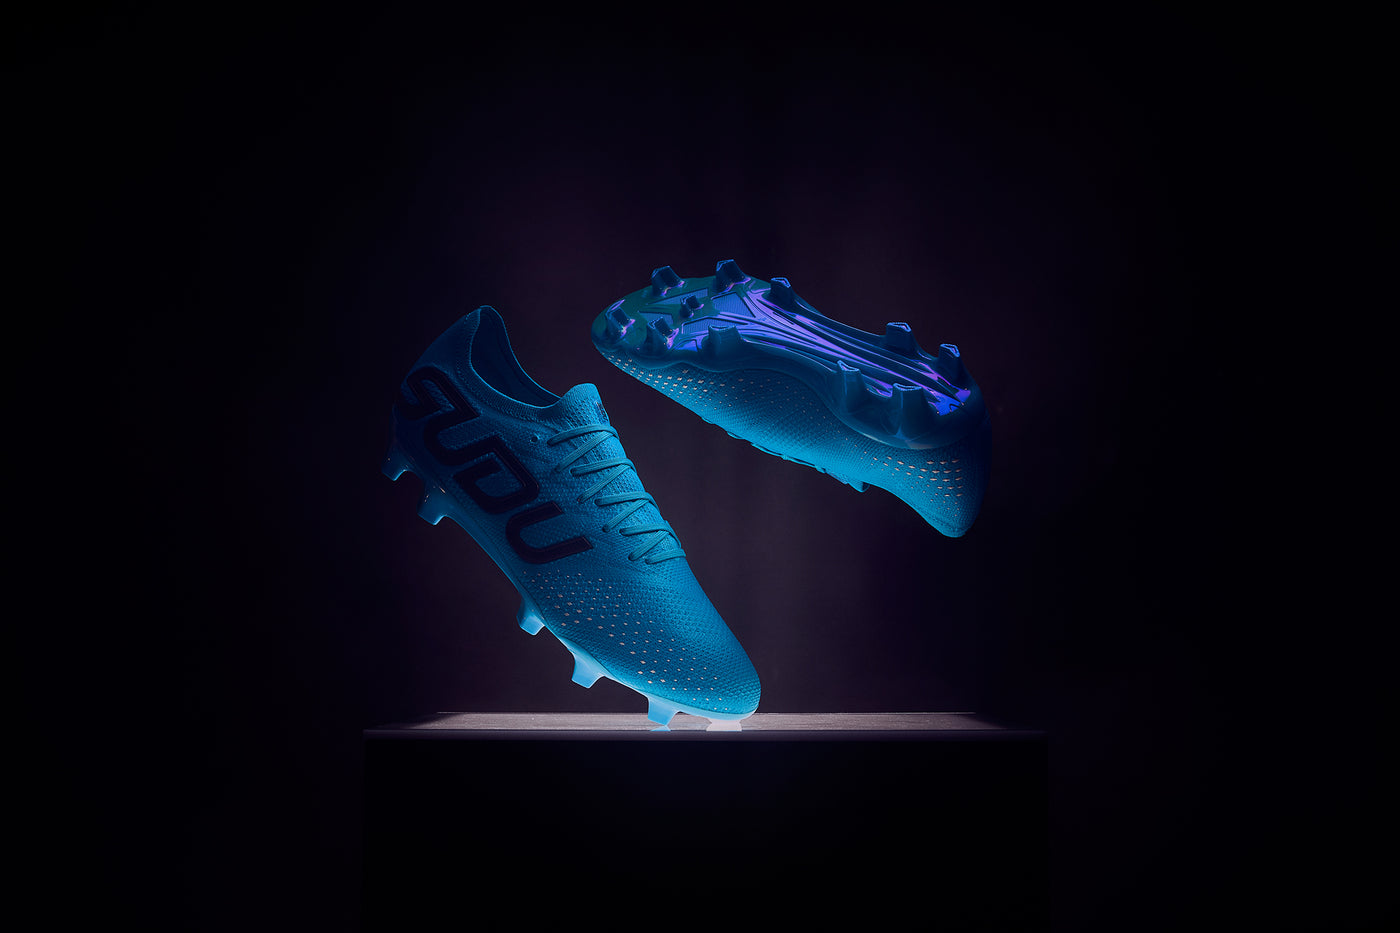 It’s Game Time! Introducing Play: The New Football Range